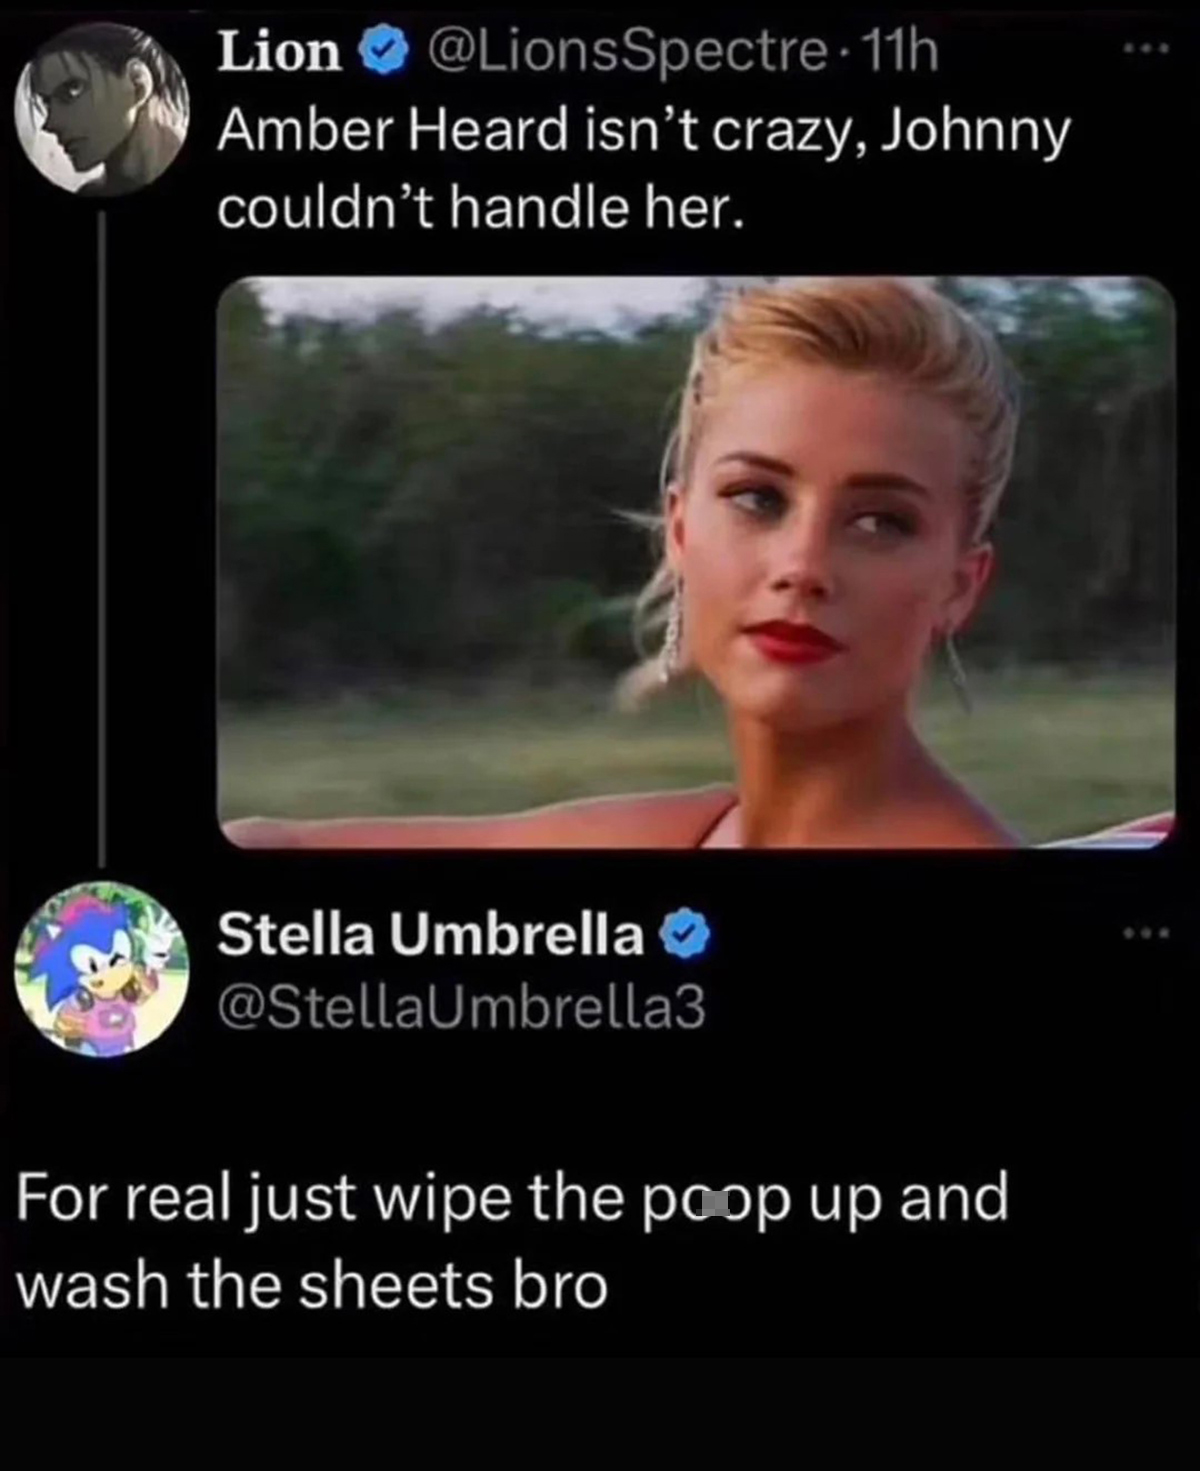 photo caption - Lion 11h Amber Heard isn't crazy, Johnny couldn't handle her. Stella Umbrella For real just wipe the poop up and wash the sheets bro